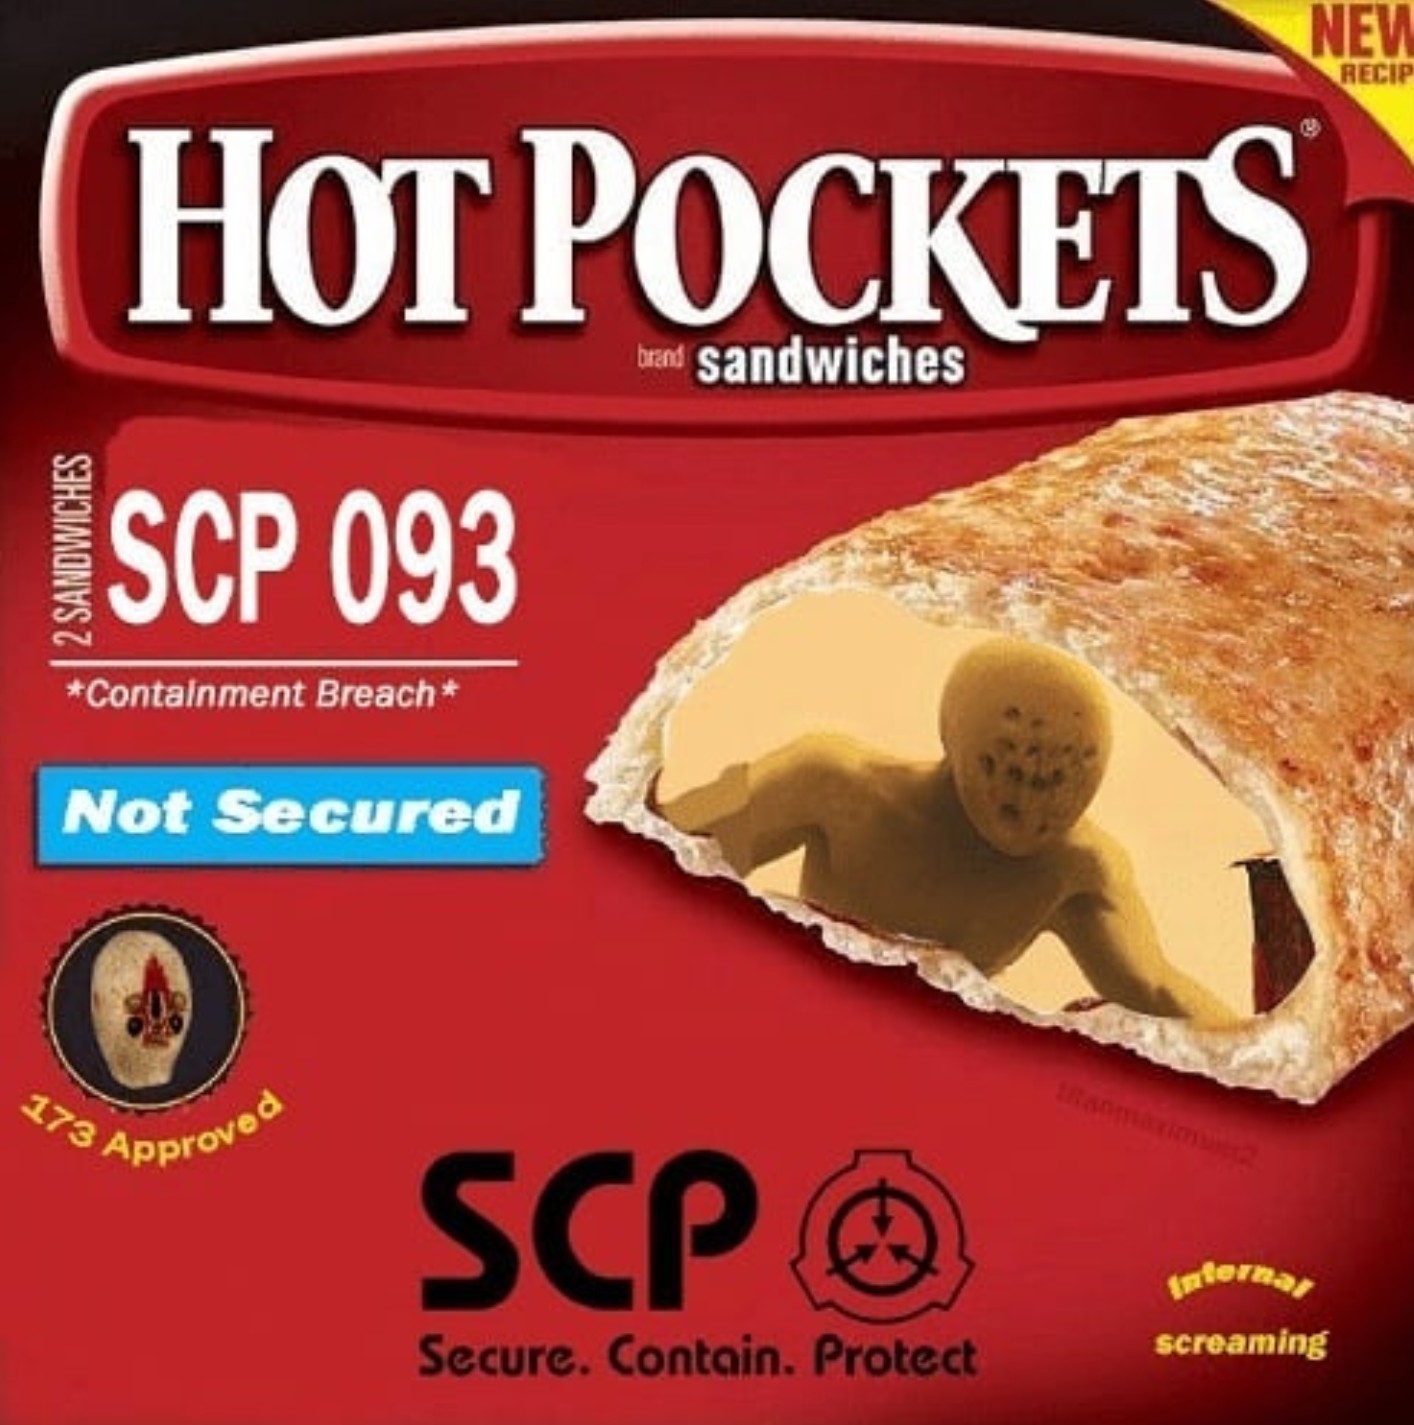 Hot Pockets breached containment - meme